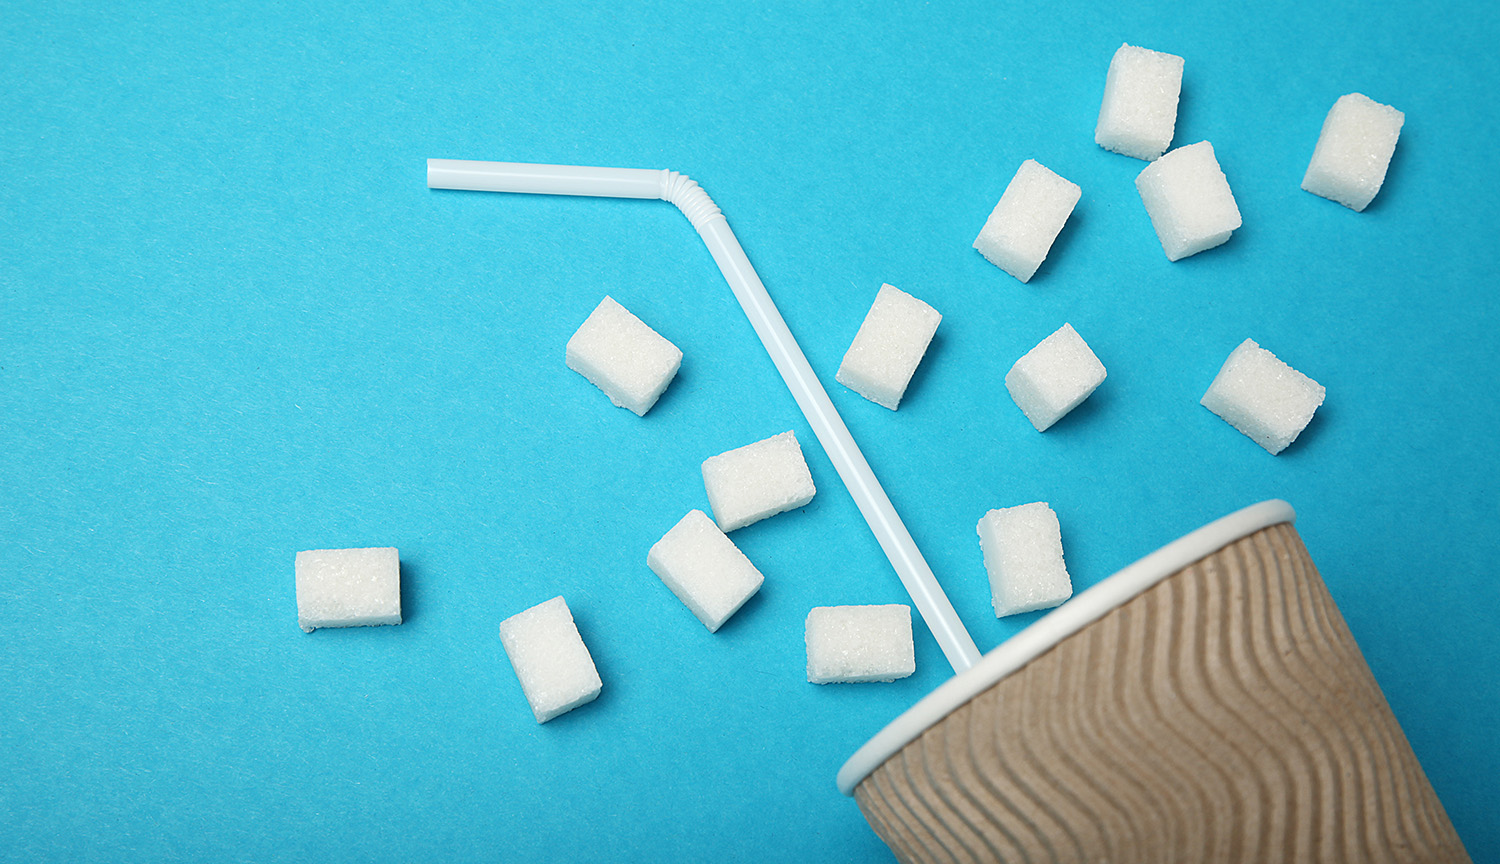 Conceptual art shows a disposable cup, straw and a bunch of sugar lumps on a blue background.